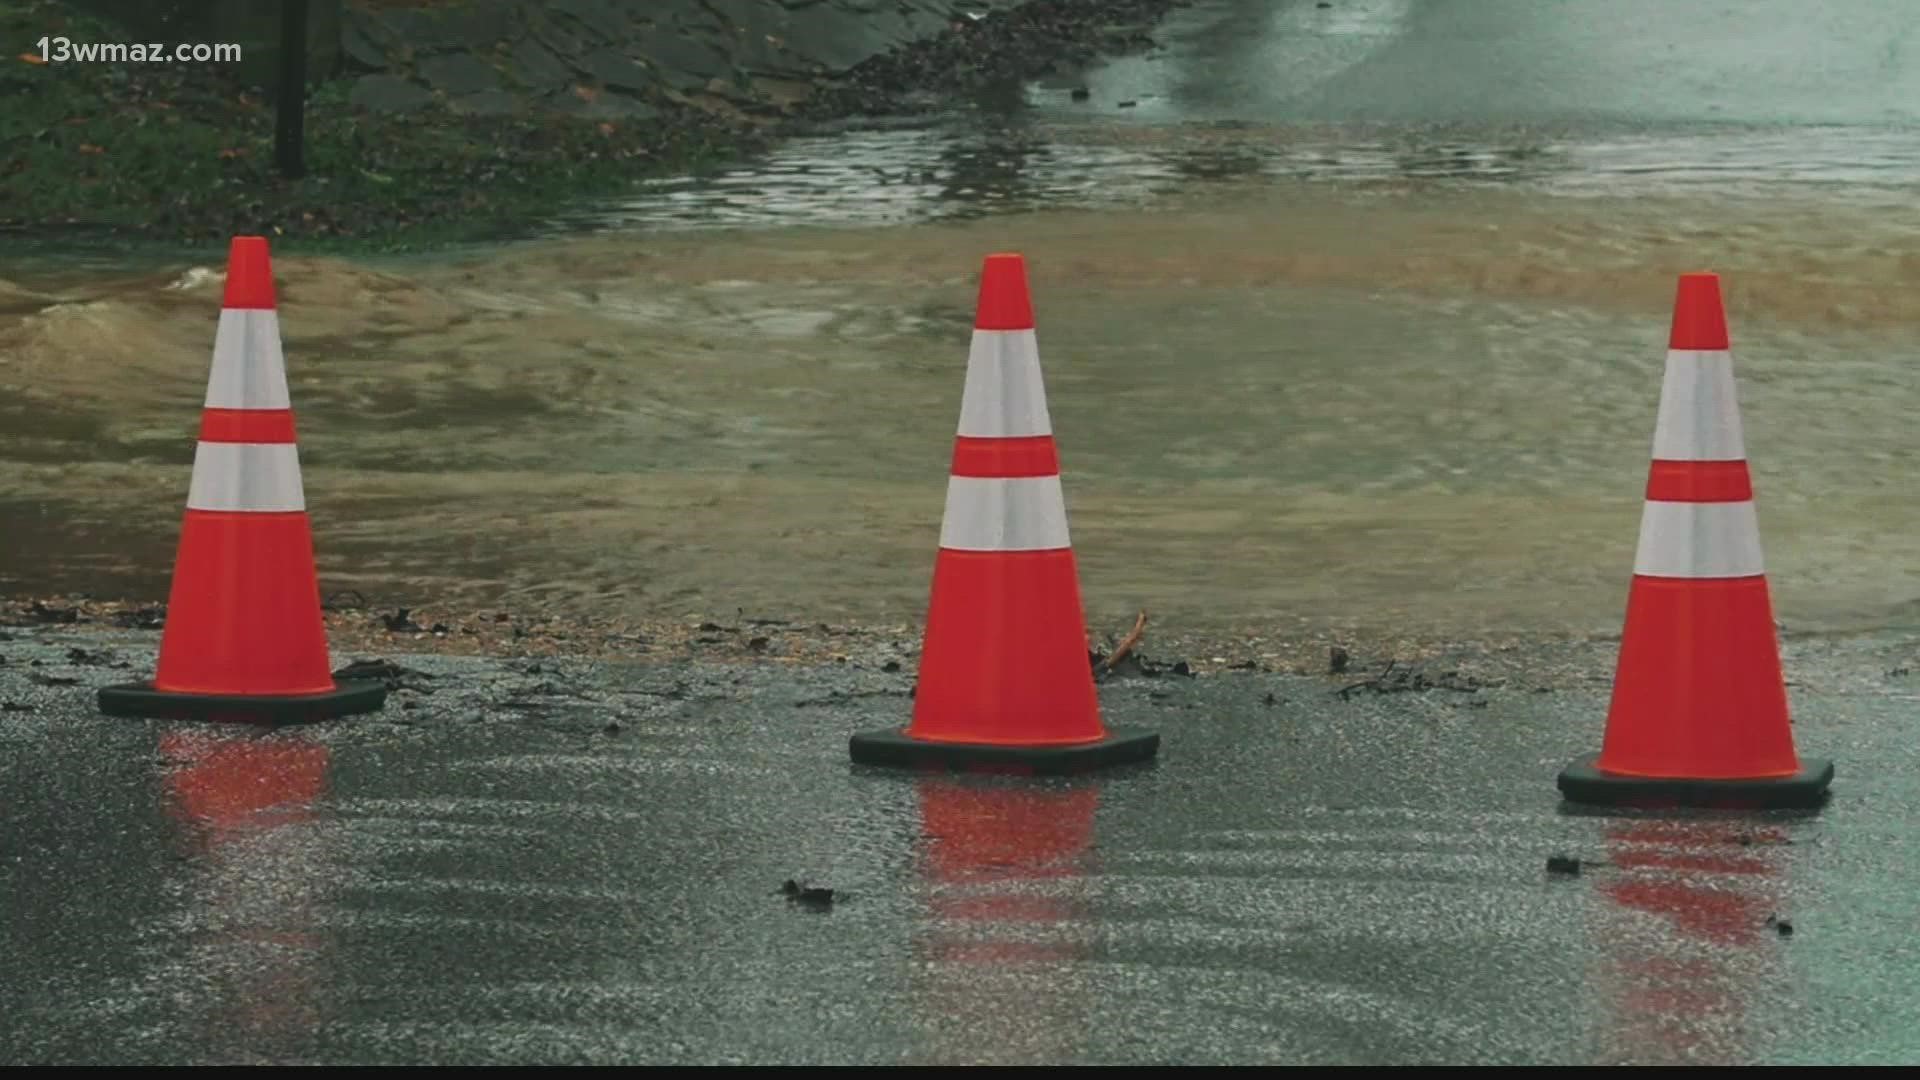 Meteorologist Taylor Stephenson tackles the truth behind driving through floodwaters on this episode of Weather Myths.